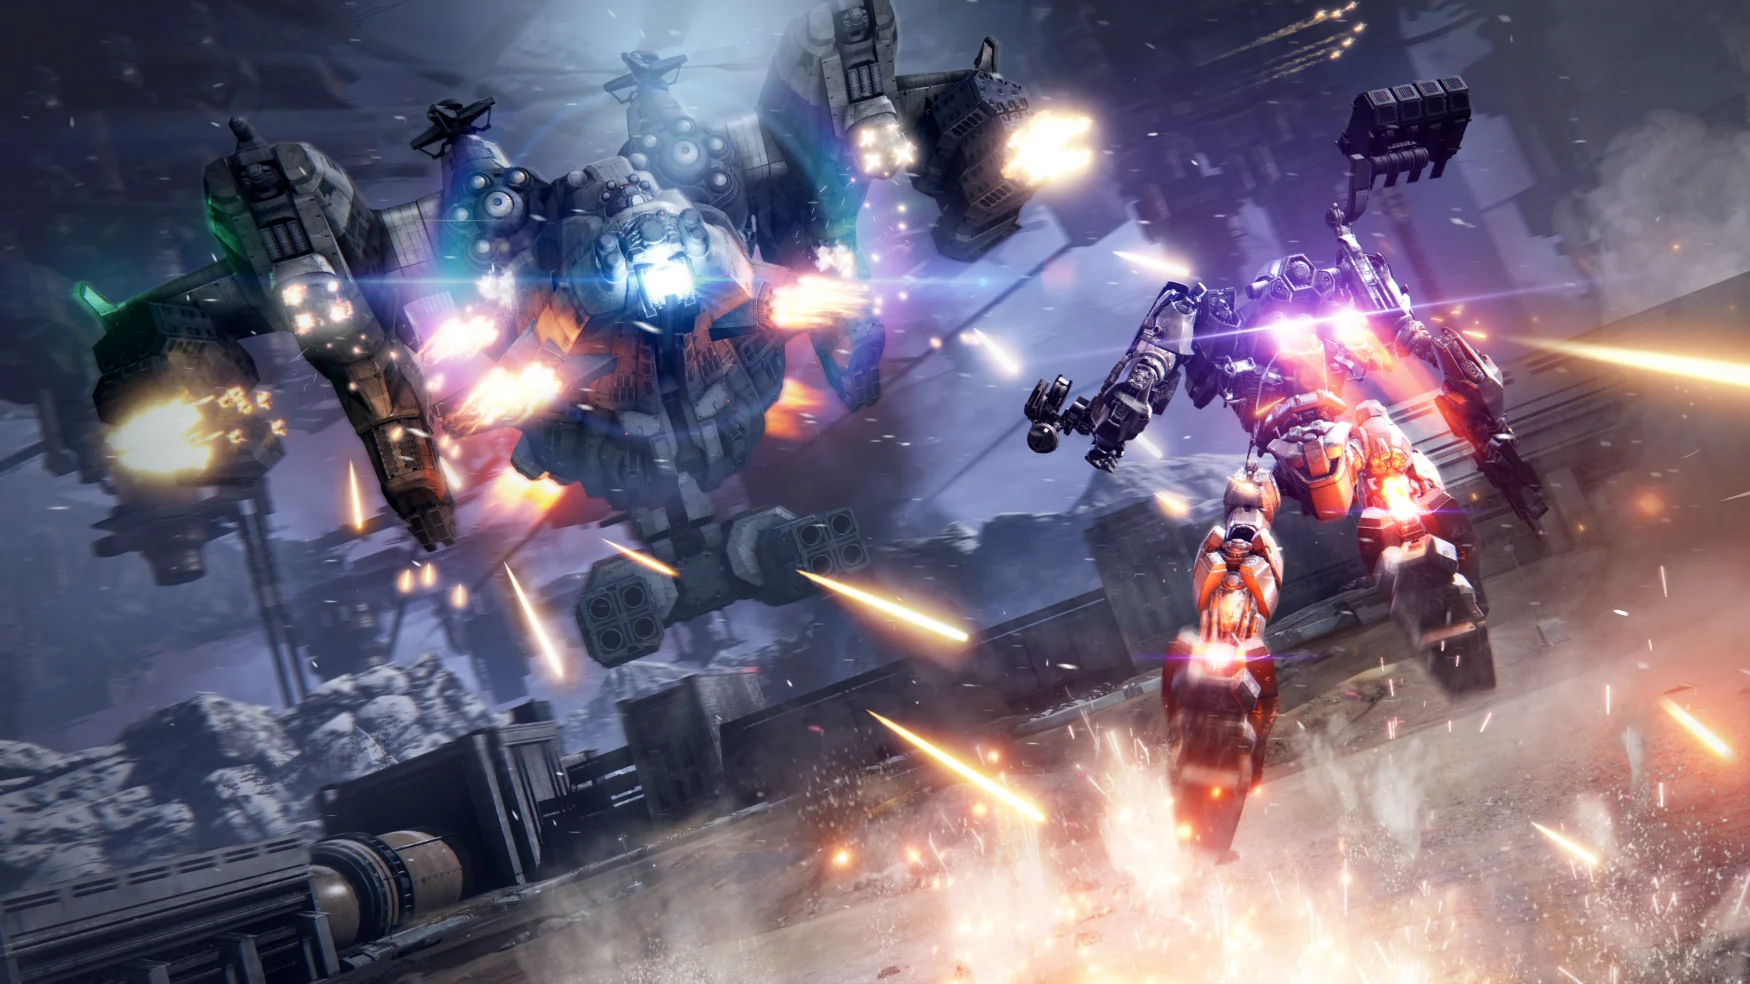 Gameplay screenshot from ‘‘Armored Core VI: Fires of Rubicon.’ The player-controlled mech (right) has its jetpack turned on as it dodges fire from a giant mech in the distance. The sky is dark and purple, gunfire and explosions all around.